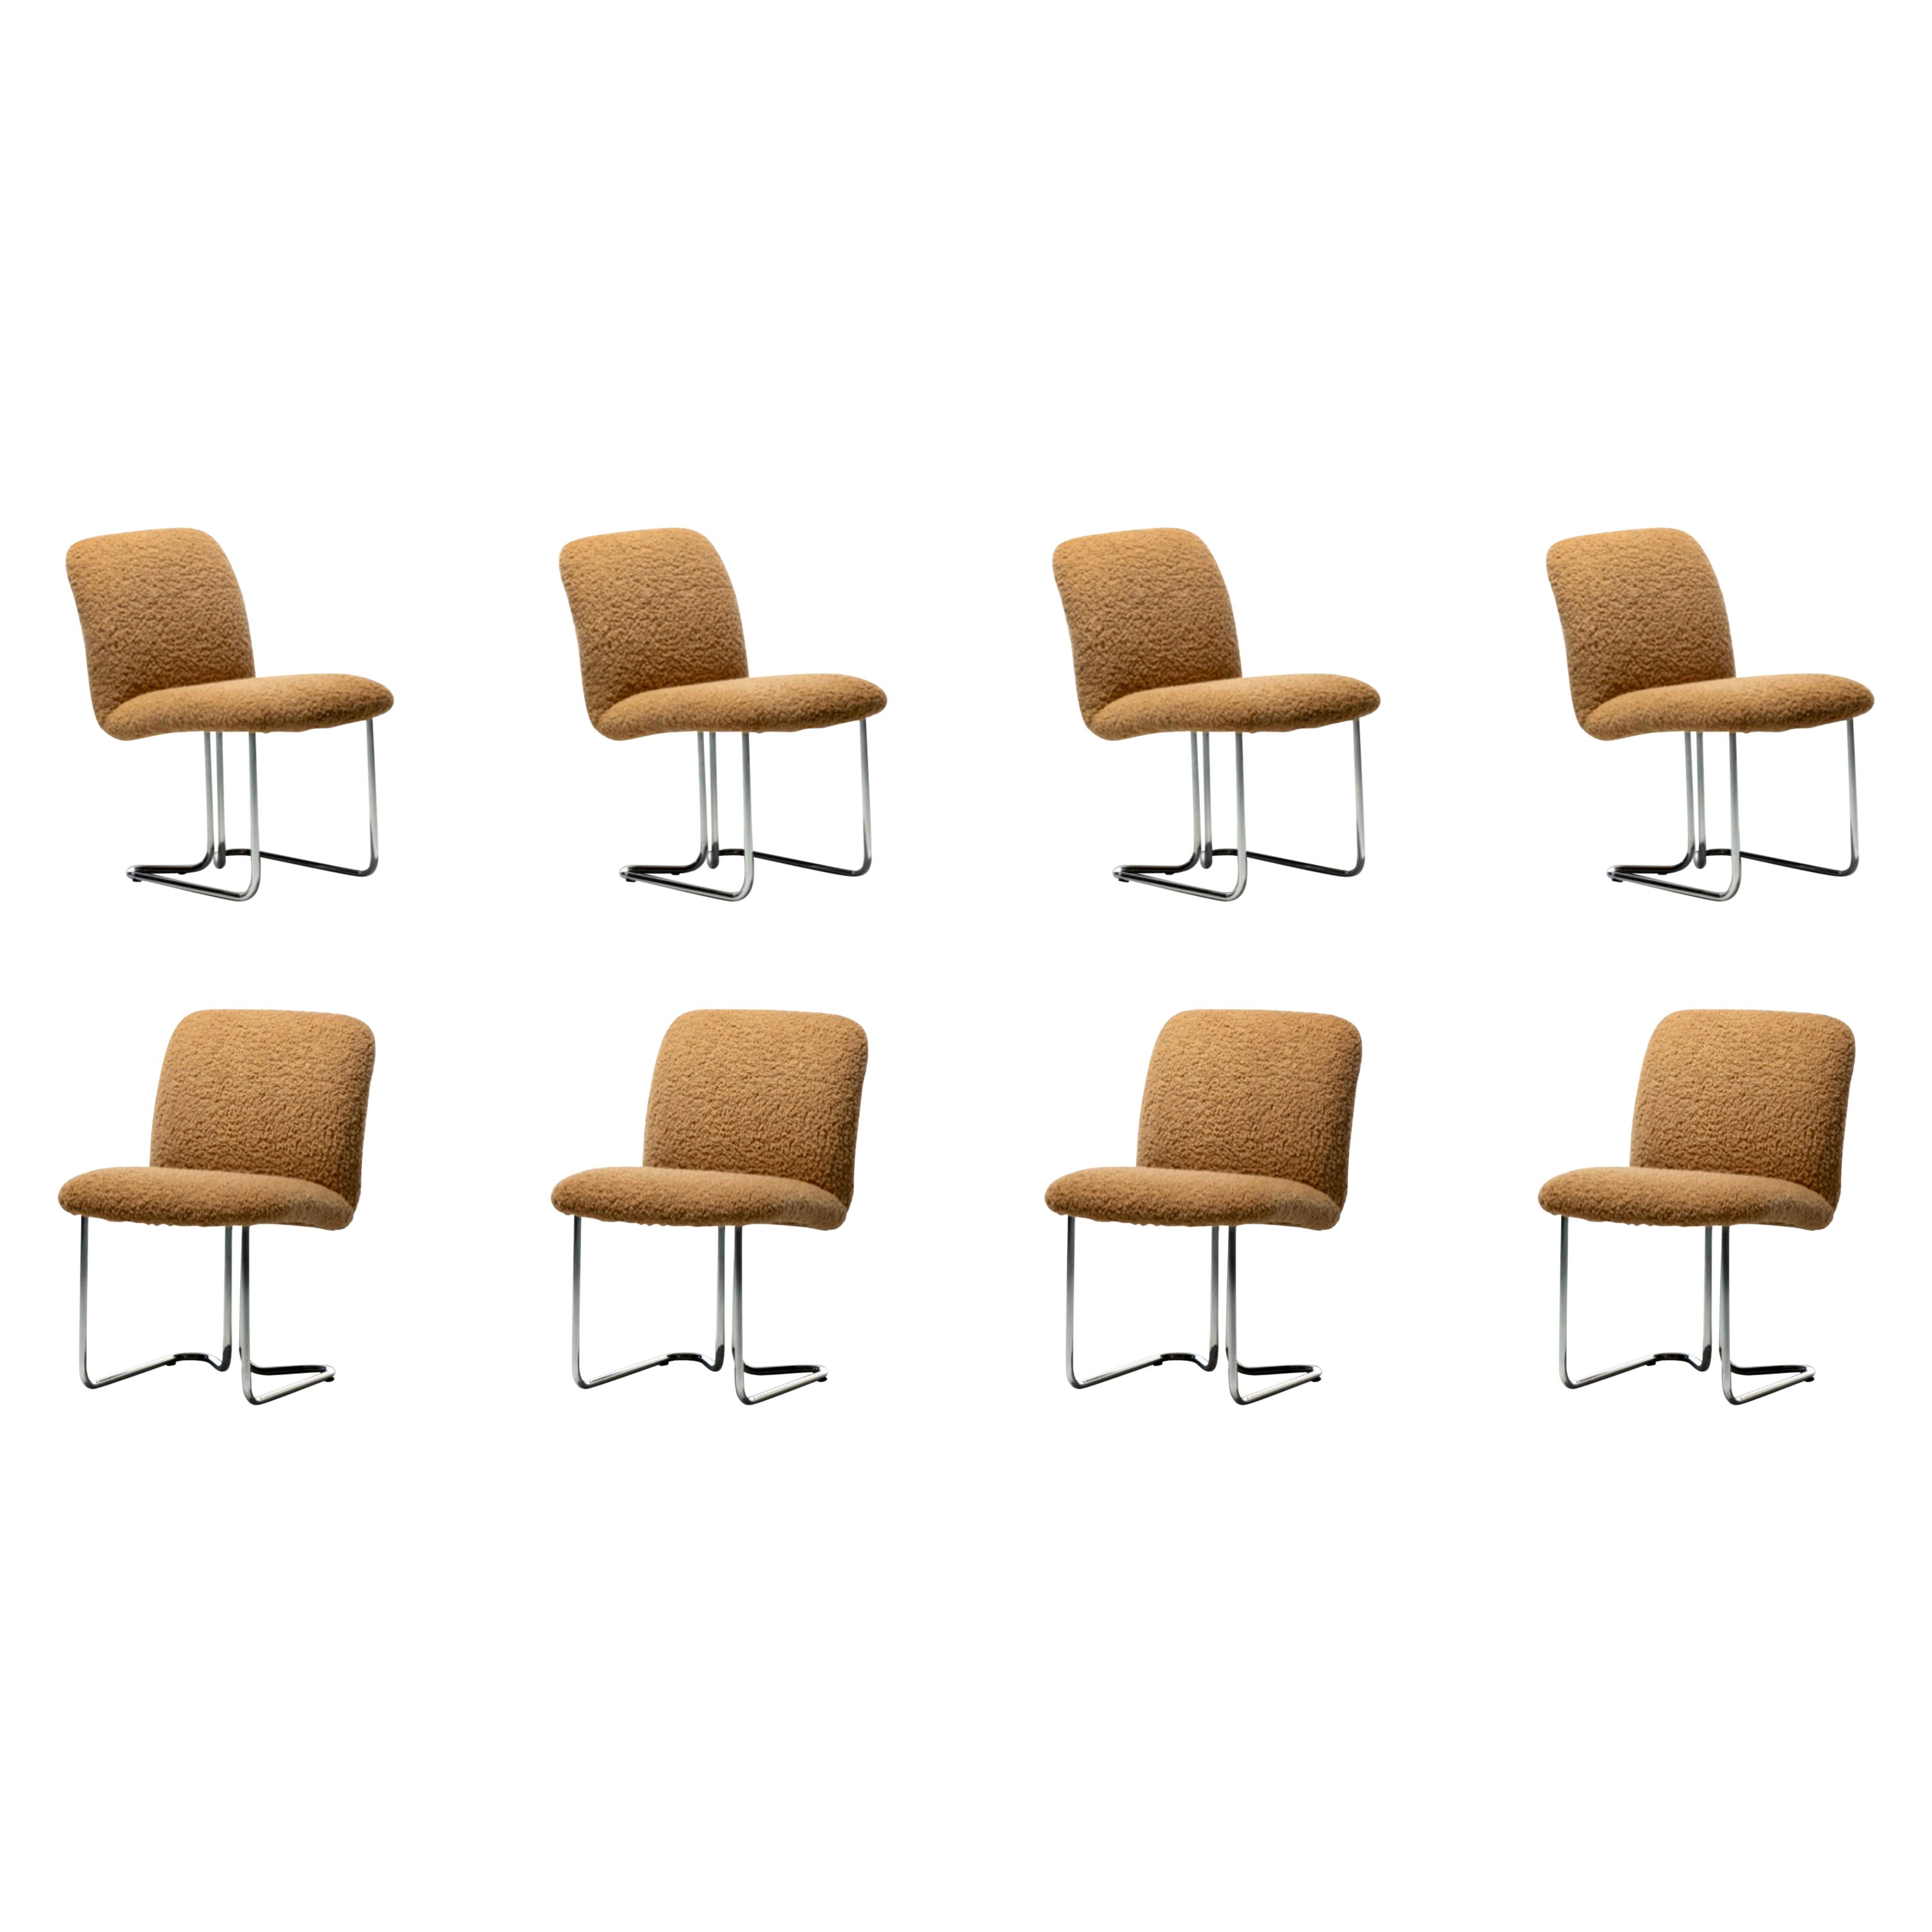 Set of 8 Design Institute of America Chrome Dining Chairs in Camel Bouclé